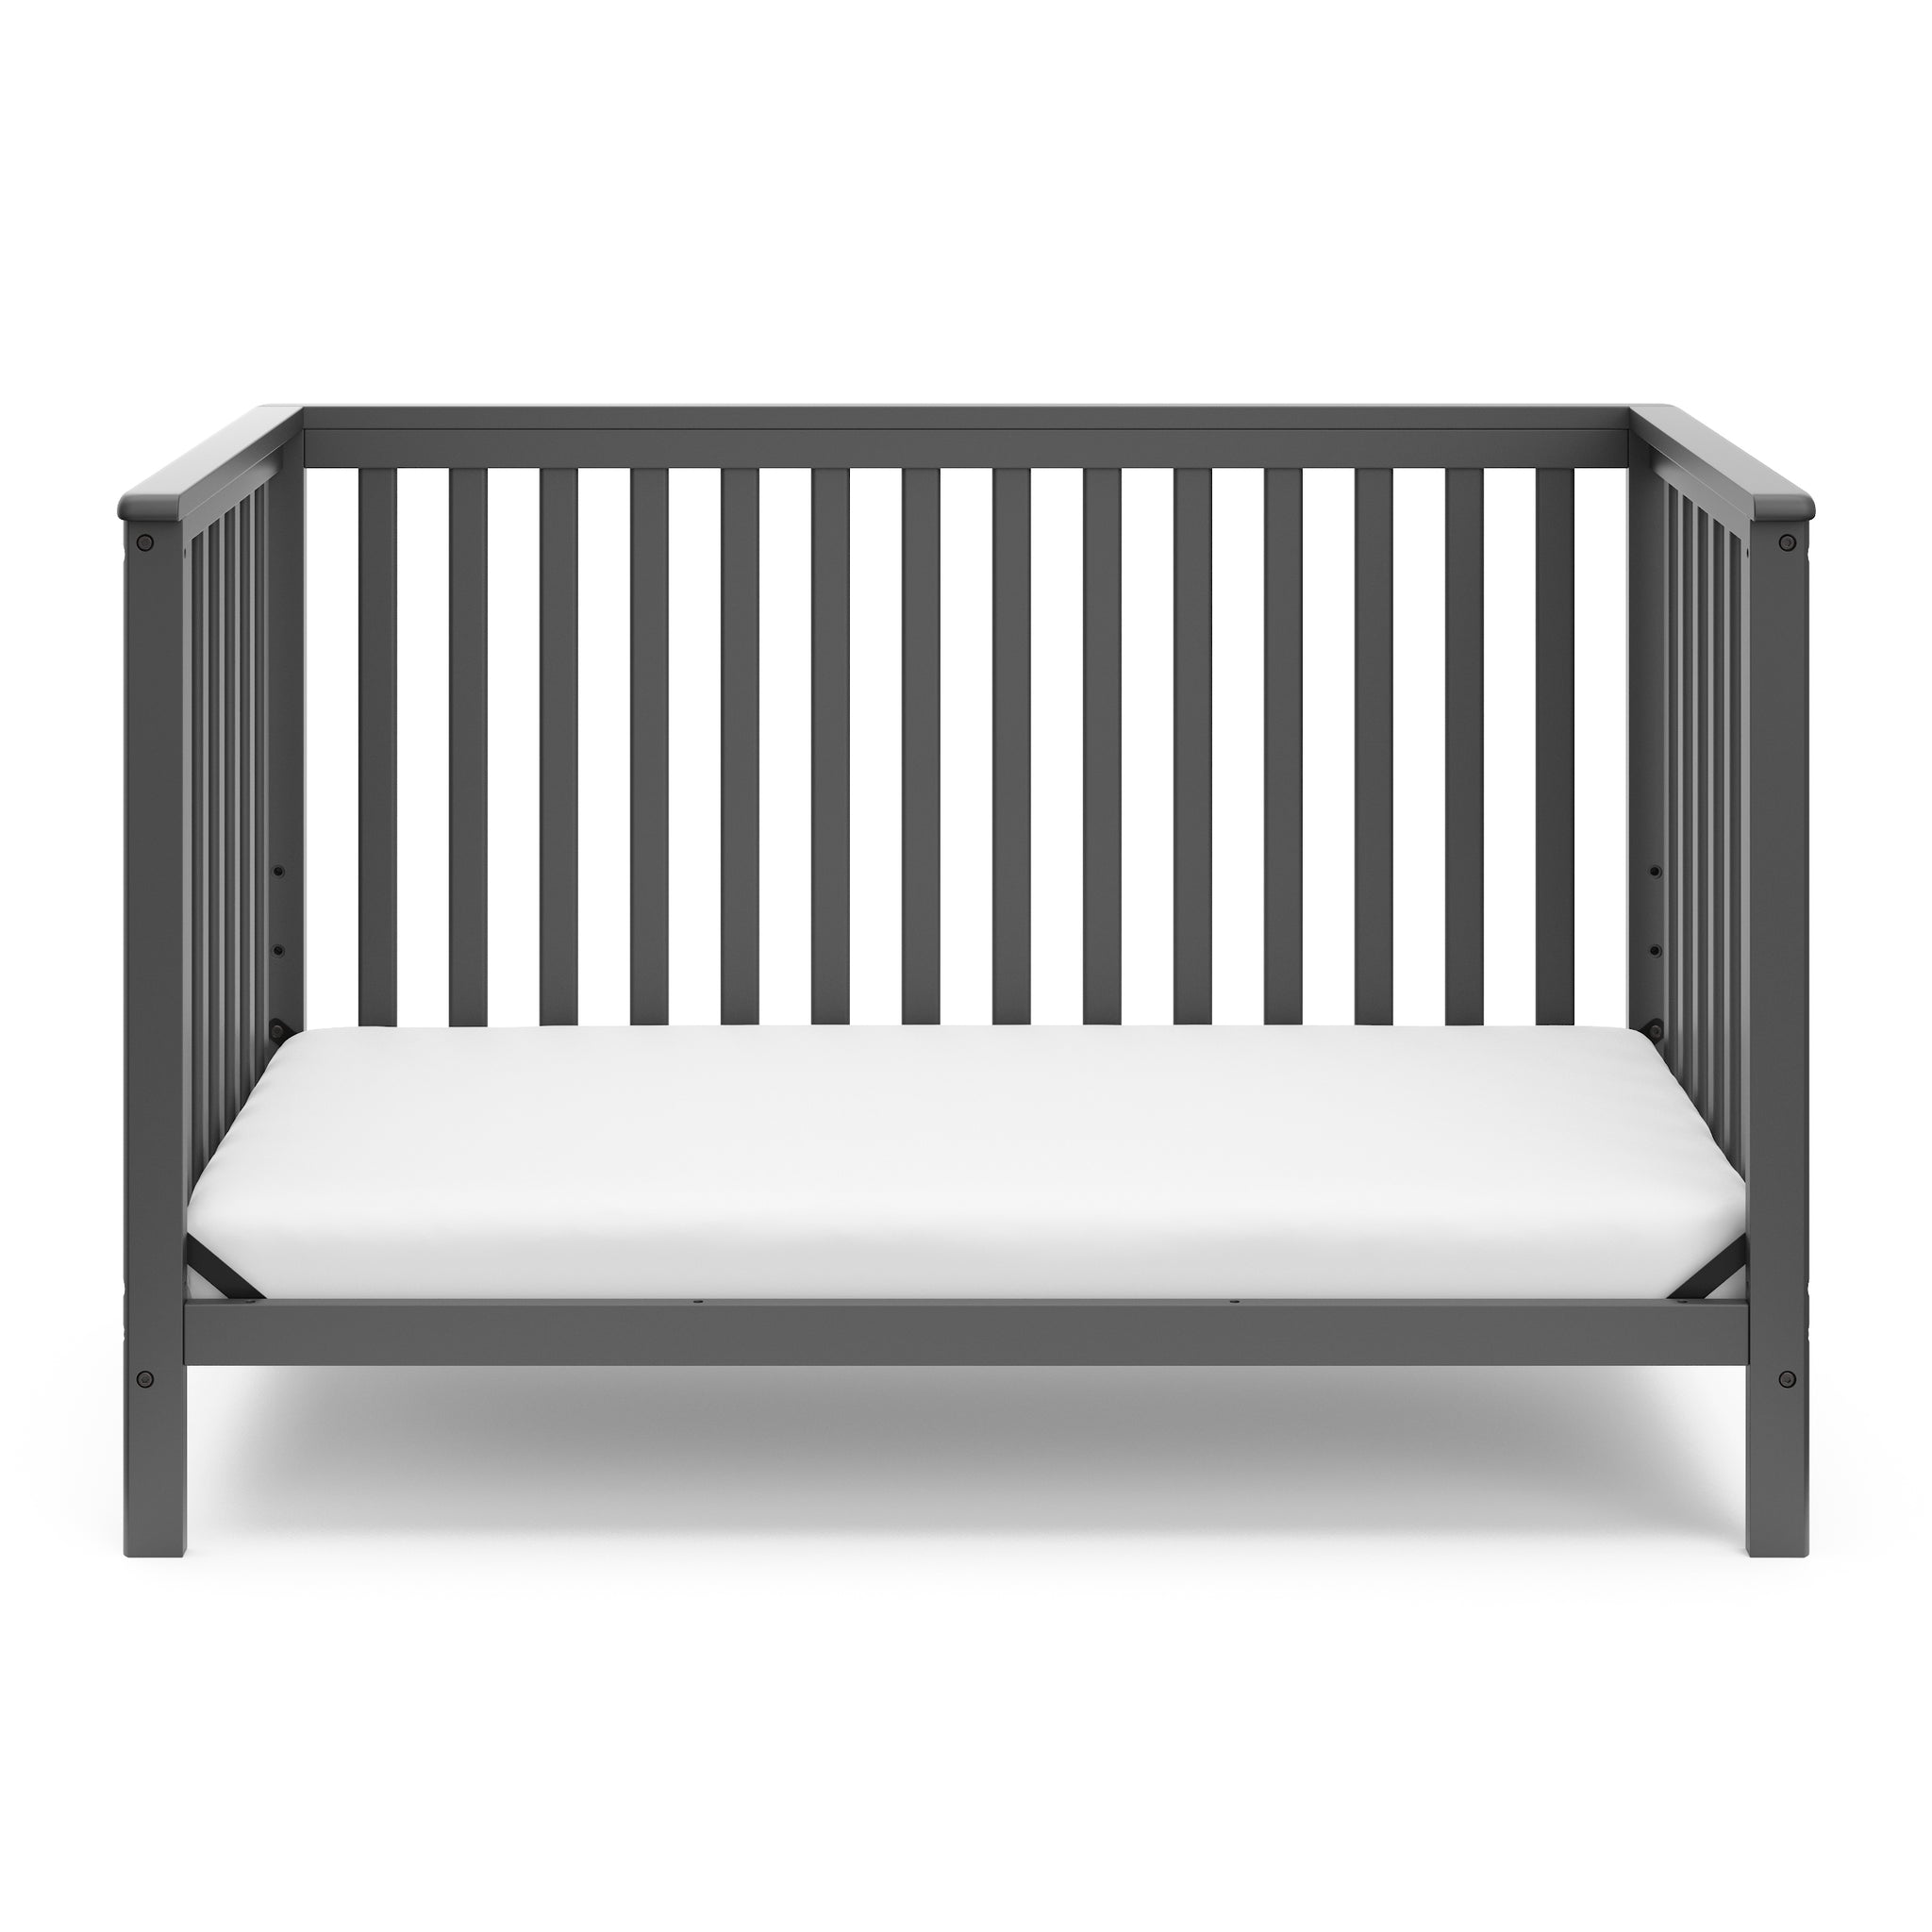 gray crib in toddler bed conversion